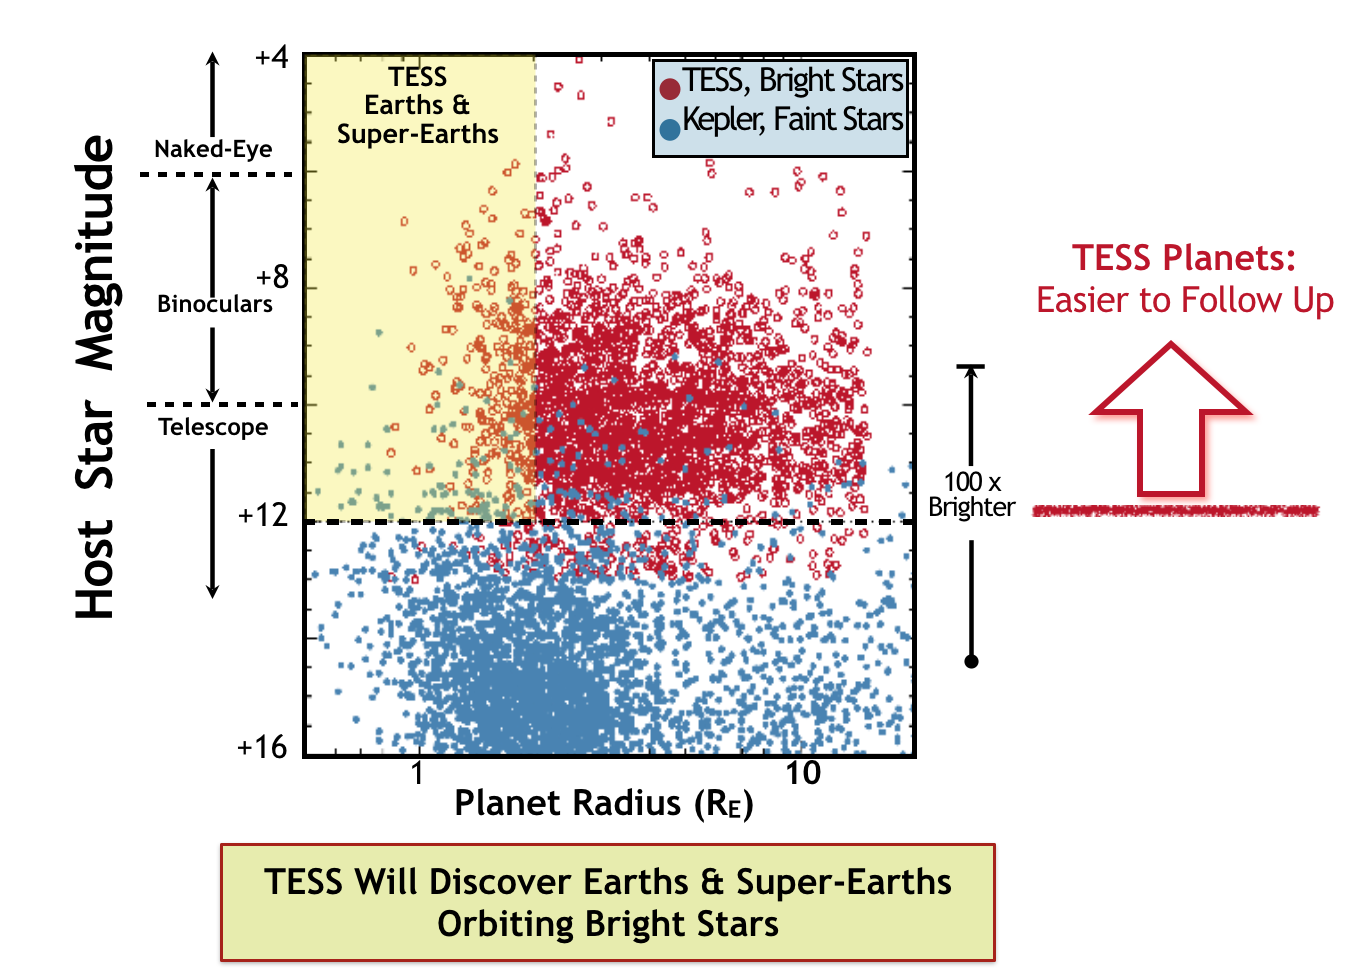 TESS will identify thousands of exoplanet candidates orbiting bright stars that will be easier to study with follow-up observations compared to those found by Kepler. Source: MIT